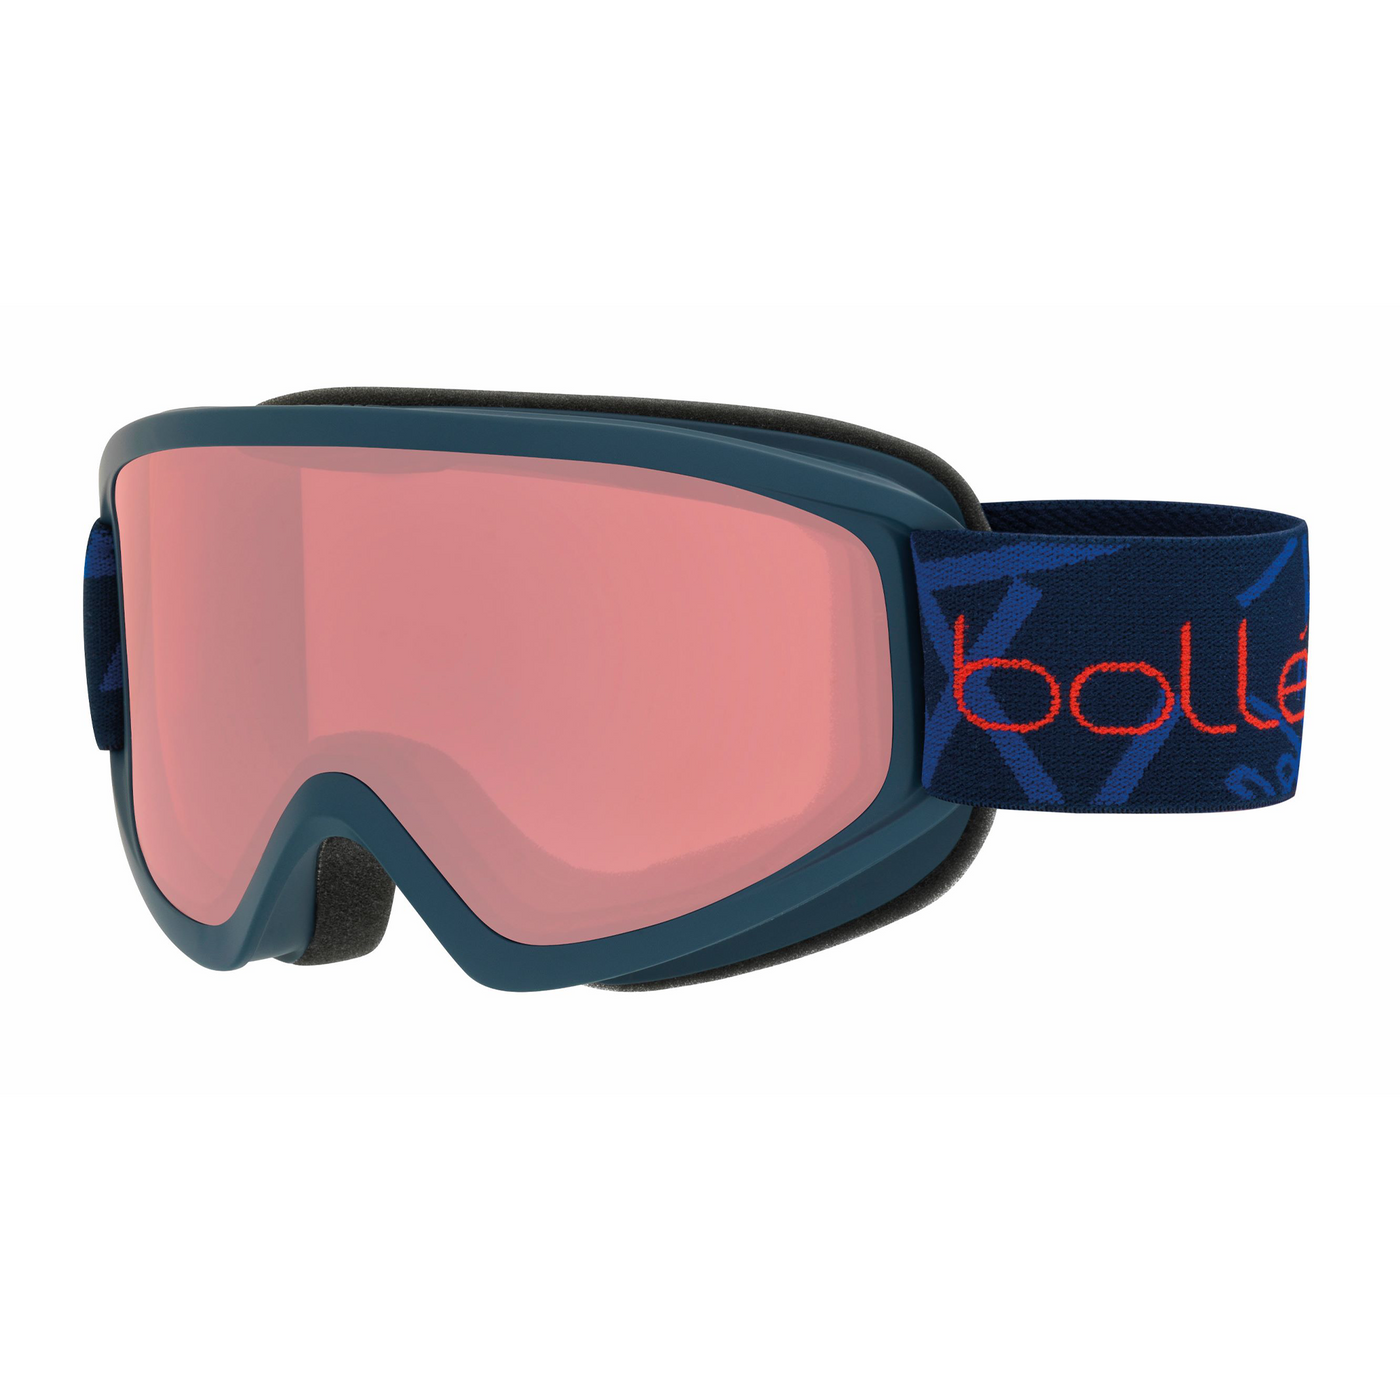 Bollé Freeze Ski Goggles - DISCONTINUED GOGGLES Bolle Matte Navy with Vermillion Lens  